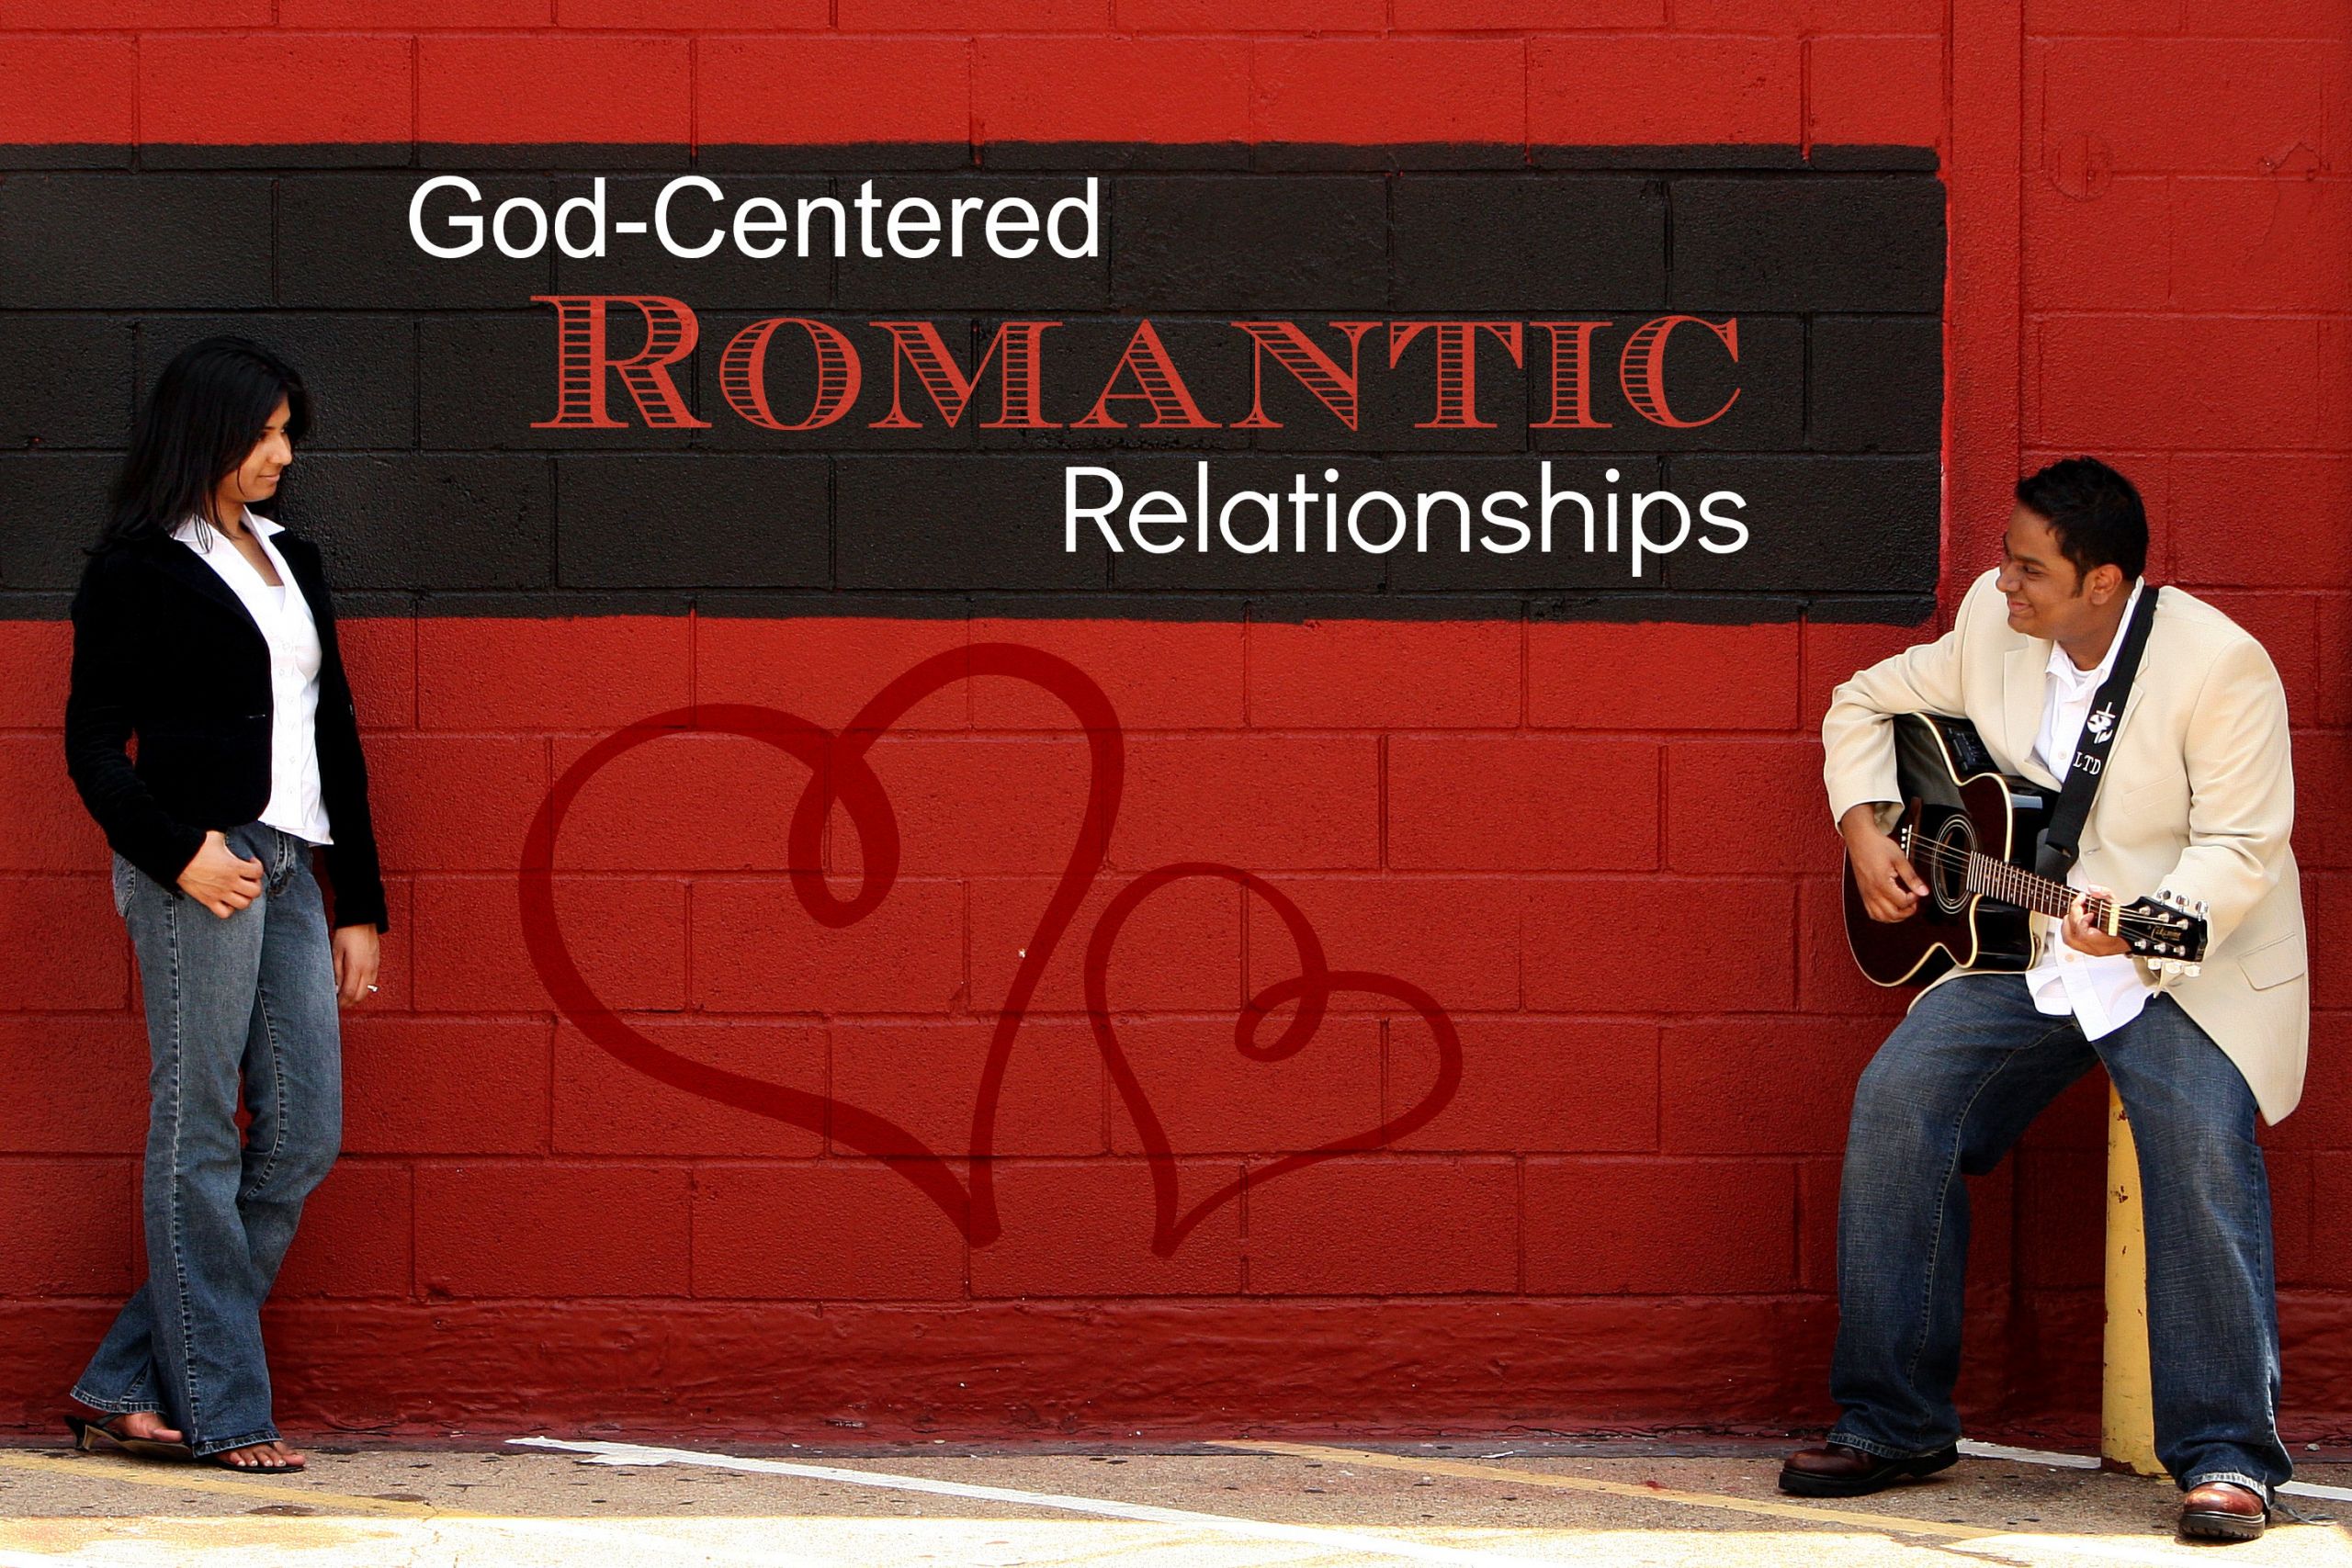 God Centered Relationship Quotes
 010 God Centered Romantic Relationships Part 1 of 2